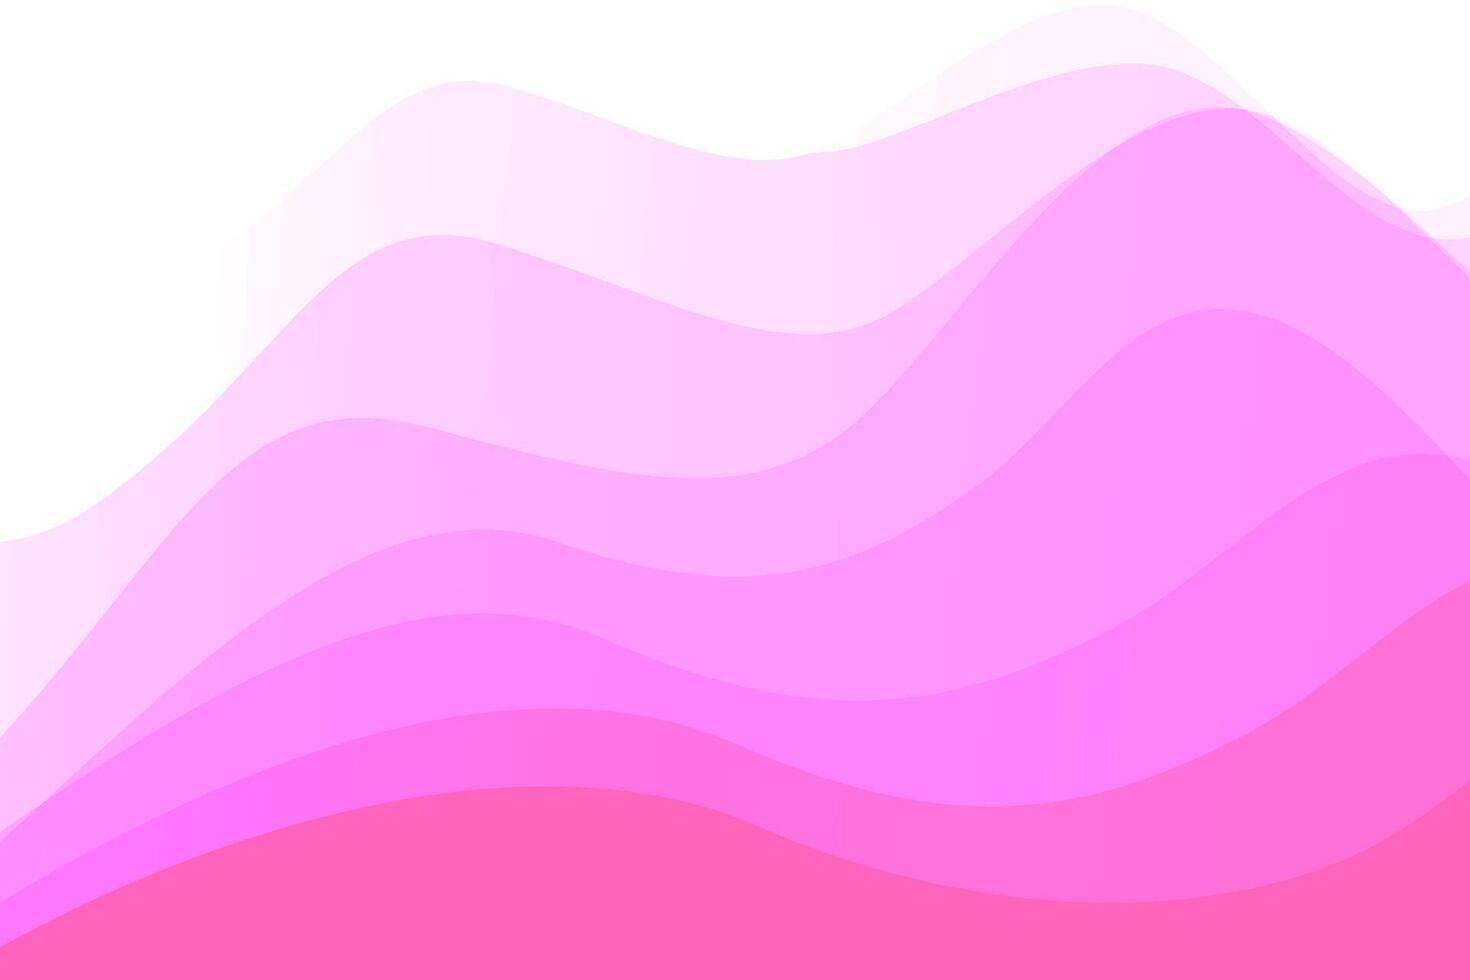 Background, Gridlines and Simplified Topographic Map with Pink and White colors for Graphic Design. vector